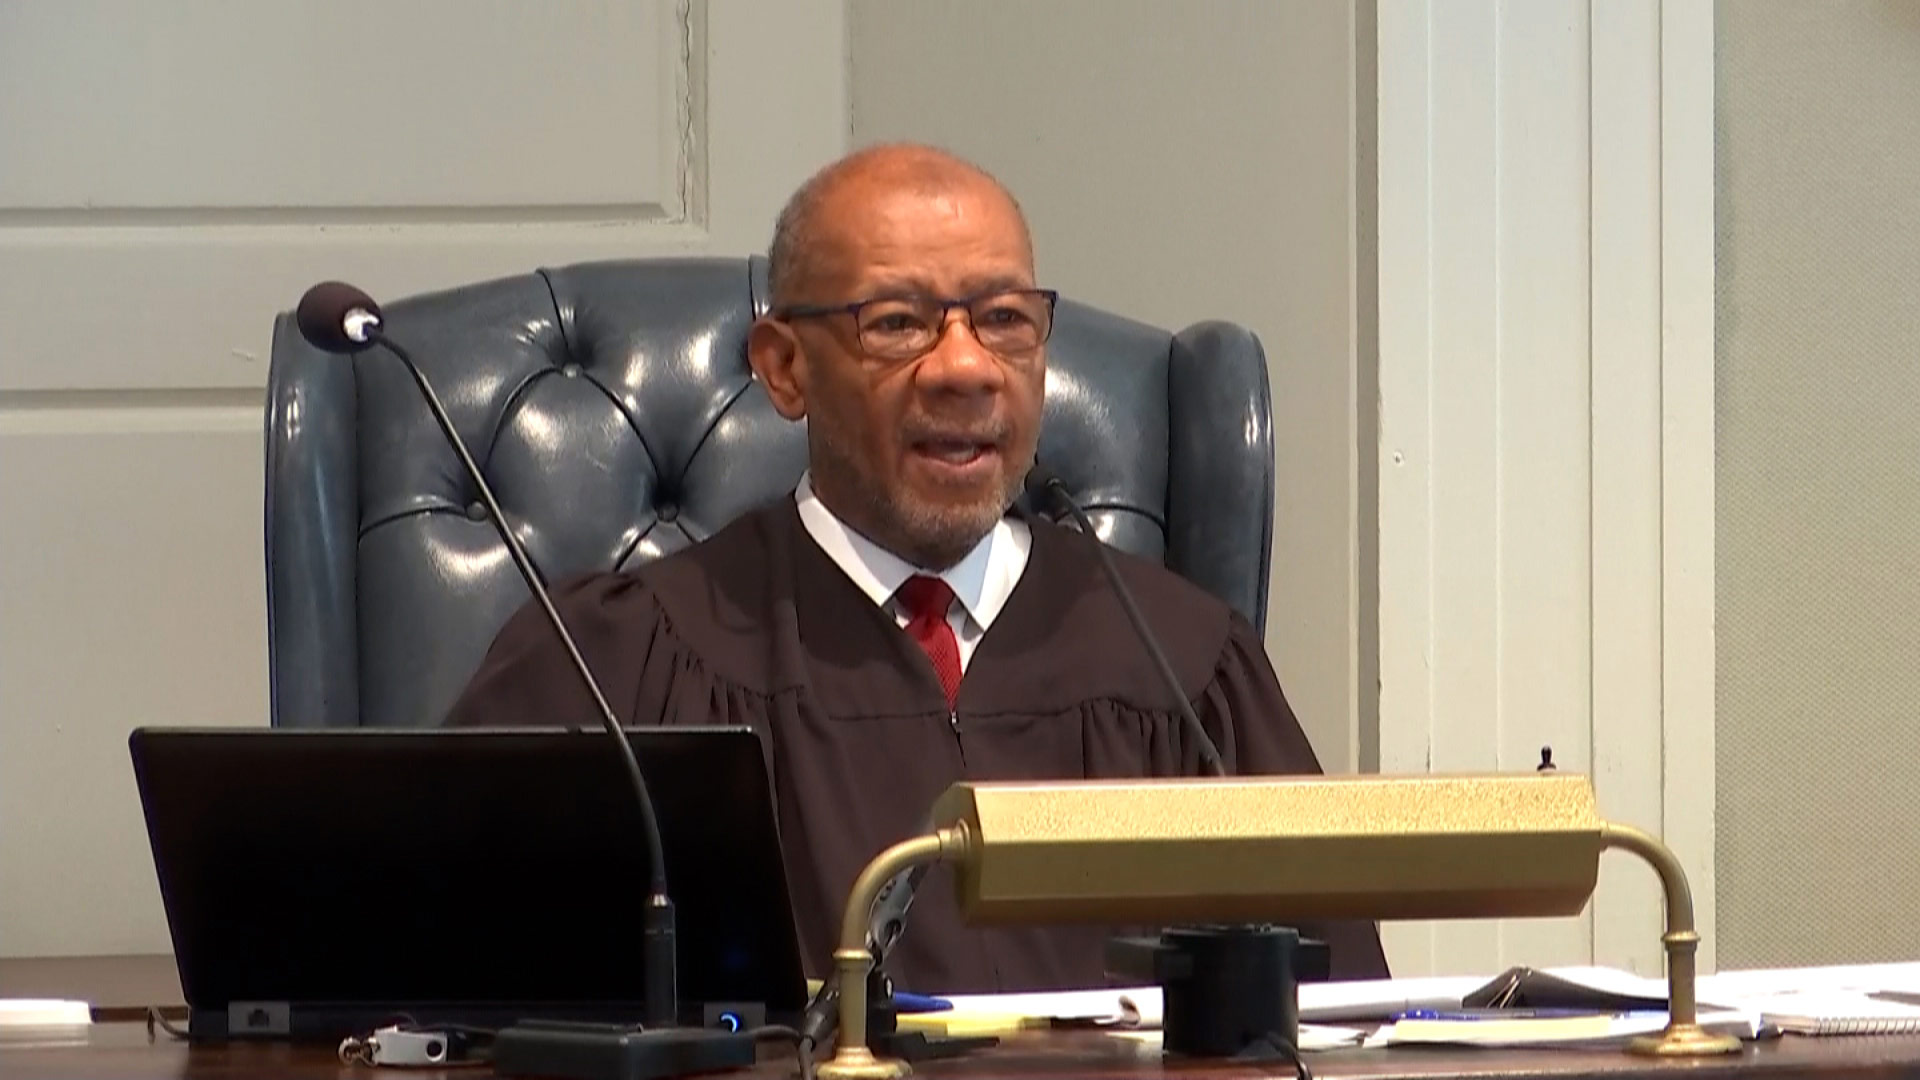 Judge Clifton Newman speaks during Alex Murdaugh’s sentencing hearing on Friday, March 3.